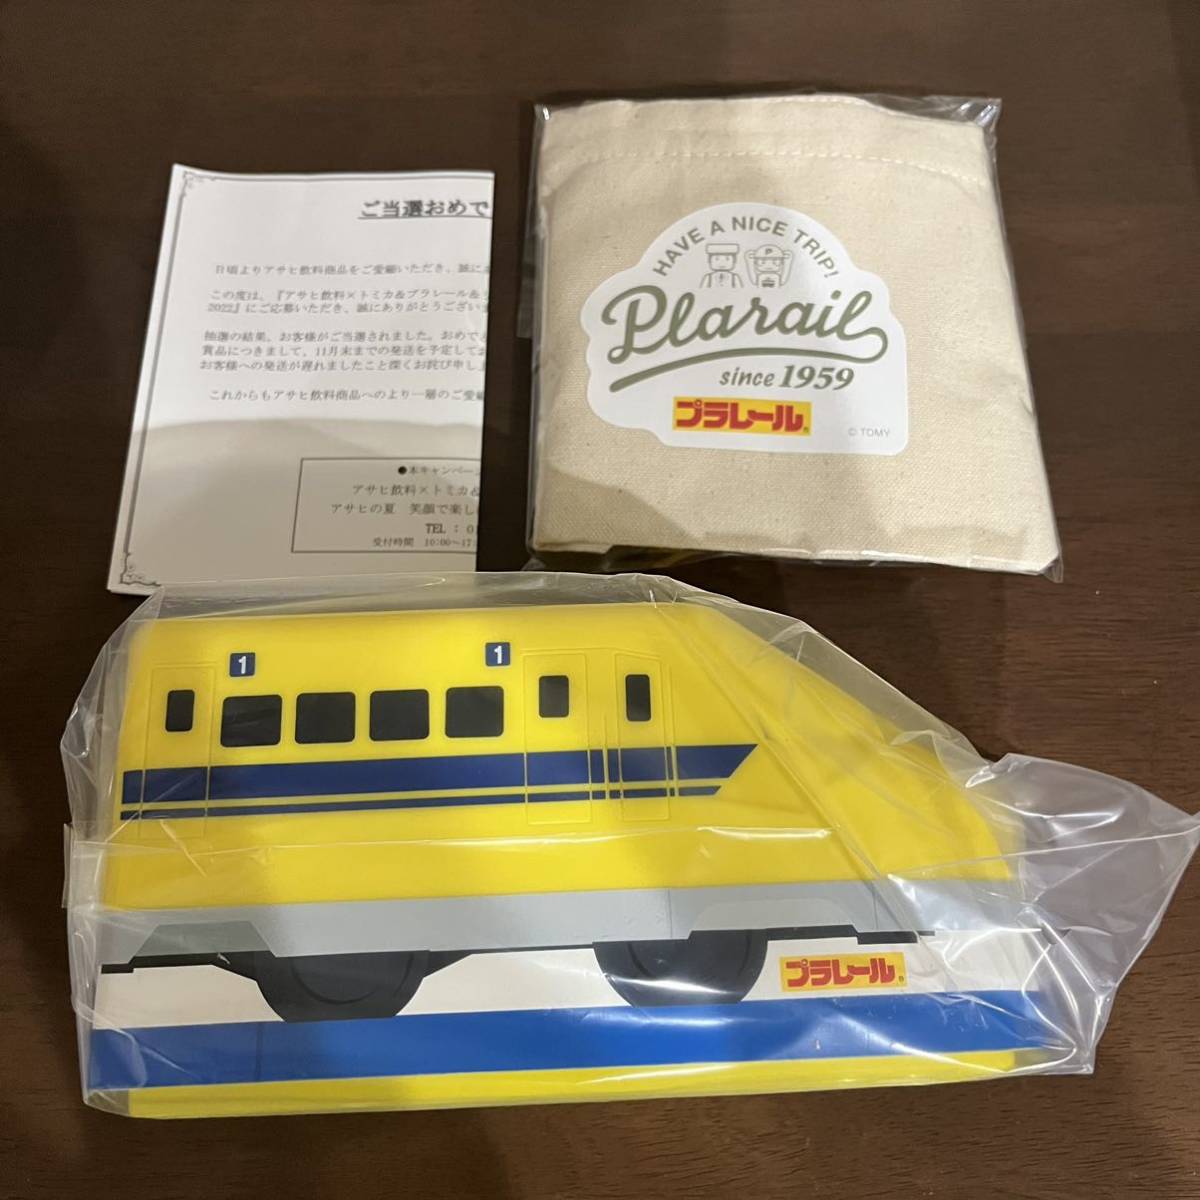  Asahi drink not for sale * Plarail * original solid lunch box lunch tote bag *923 shape dokta- yellow * Plarail outing goods 